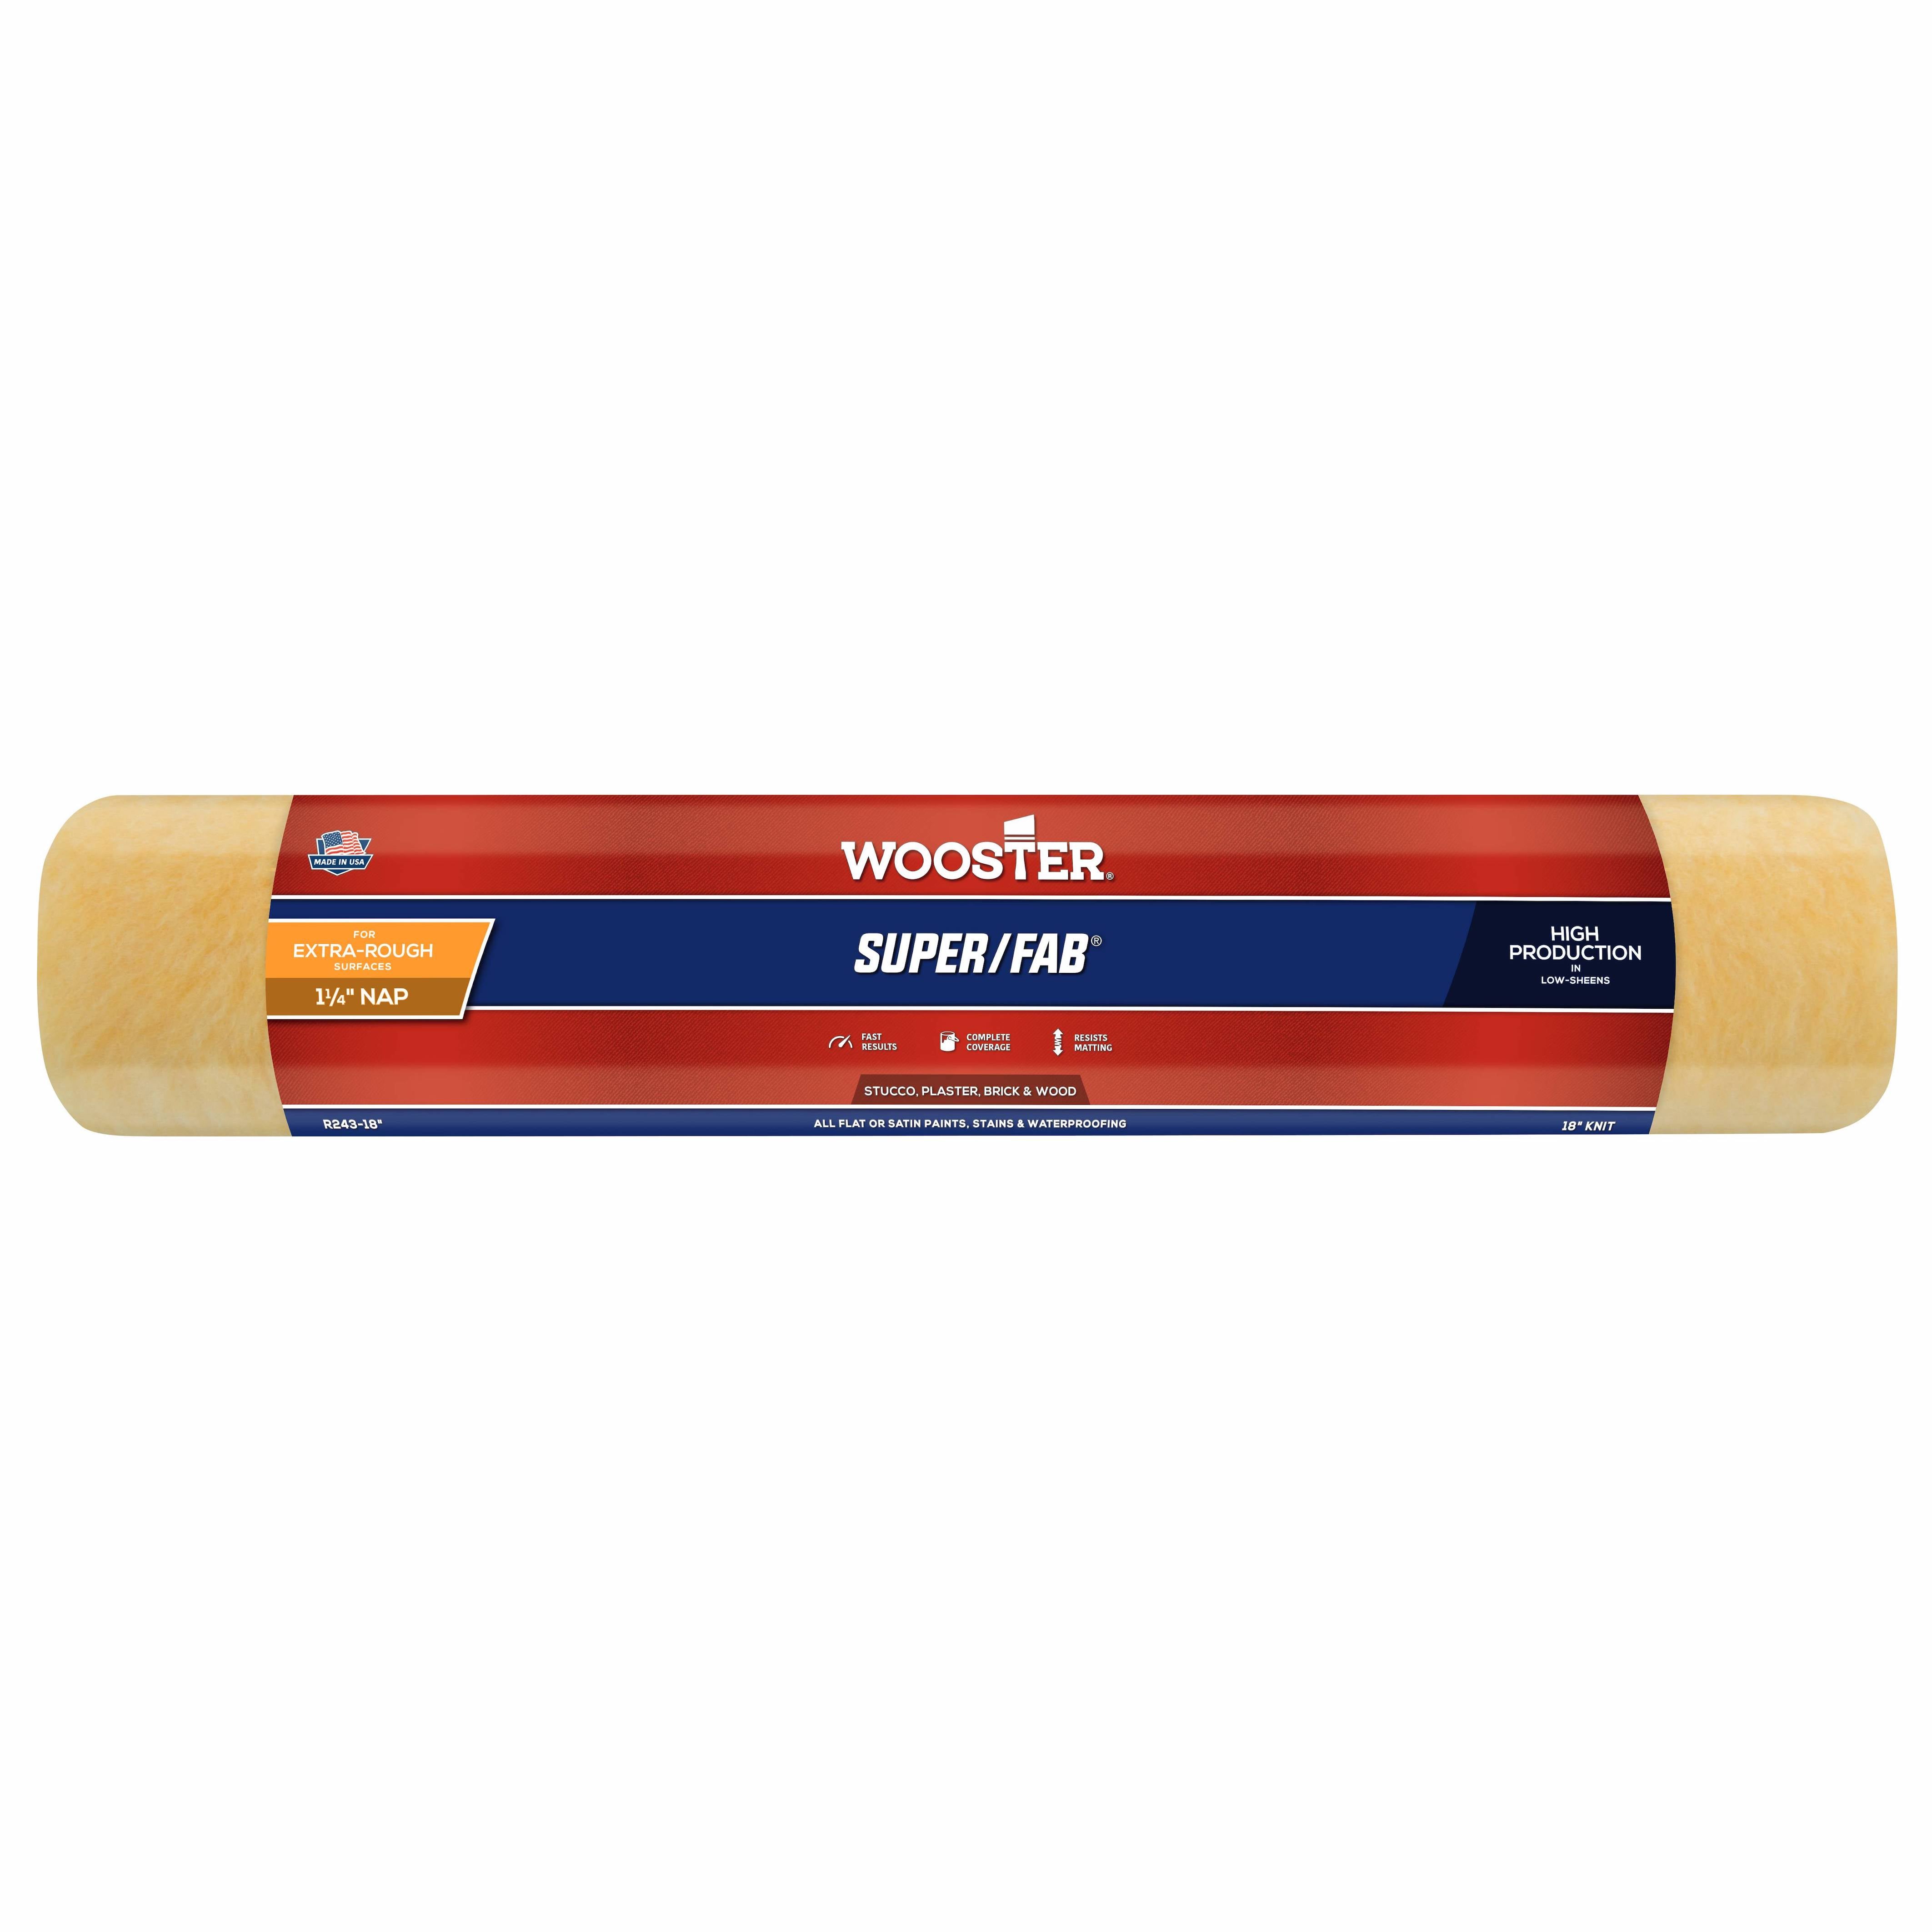 Wooster 18" Super/Fab Paint Roller Sleeve 1/4" Nap